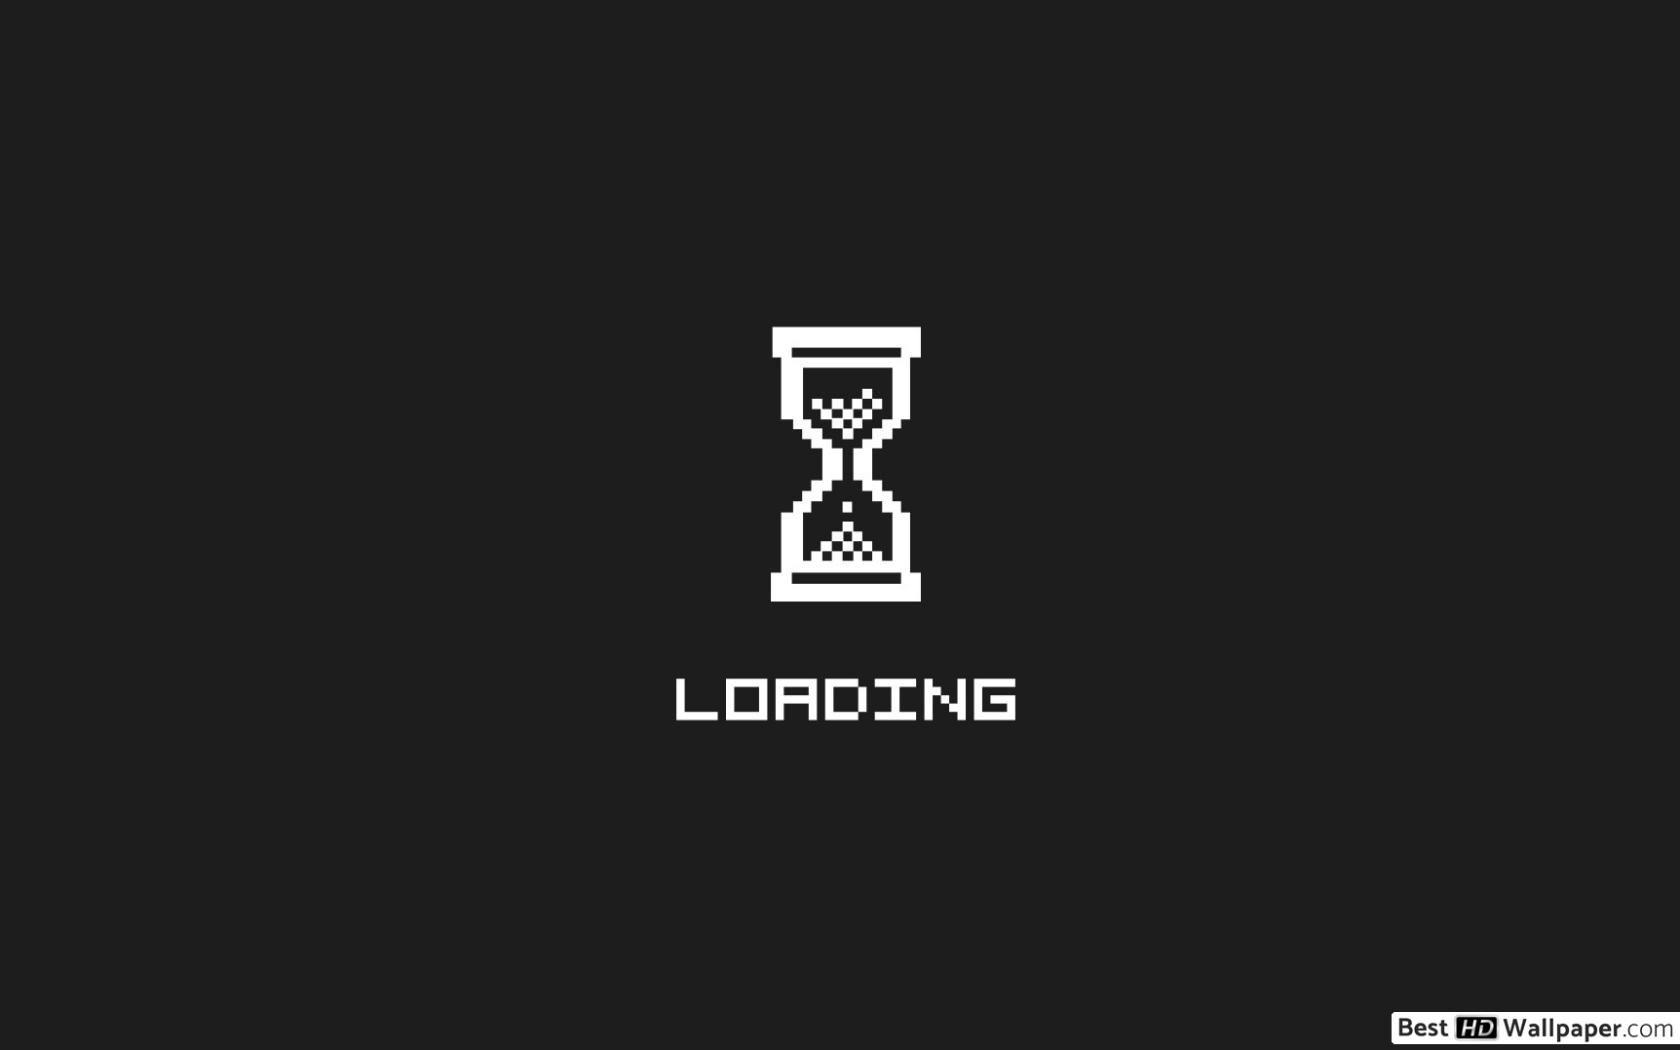 Black and white pixel loading hourglass HD wallpaper download